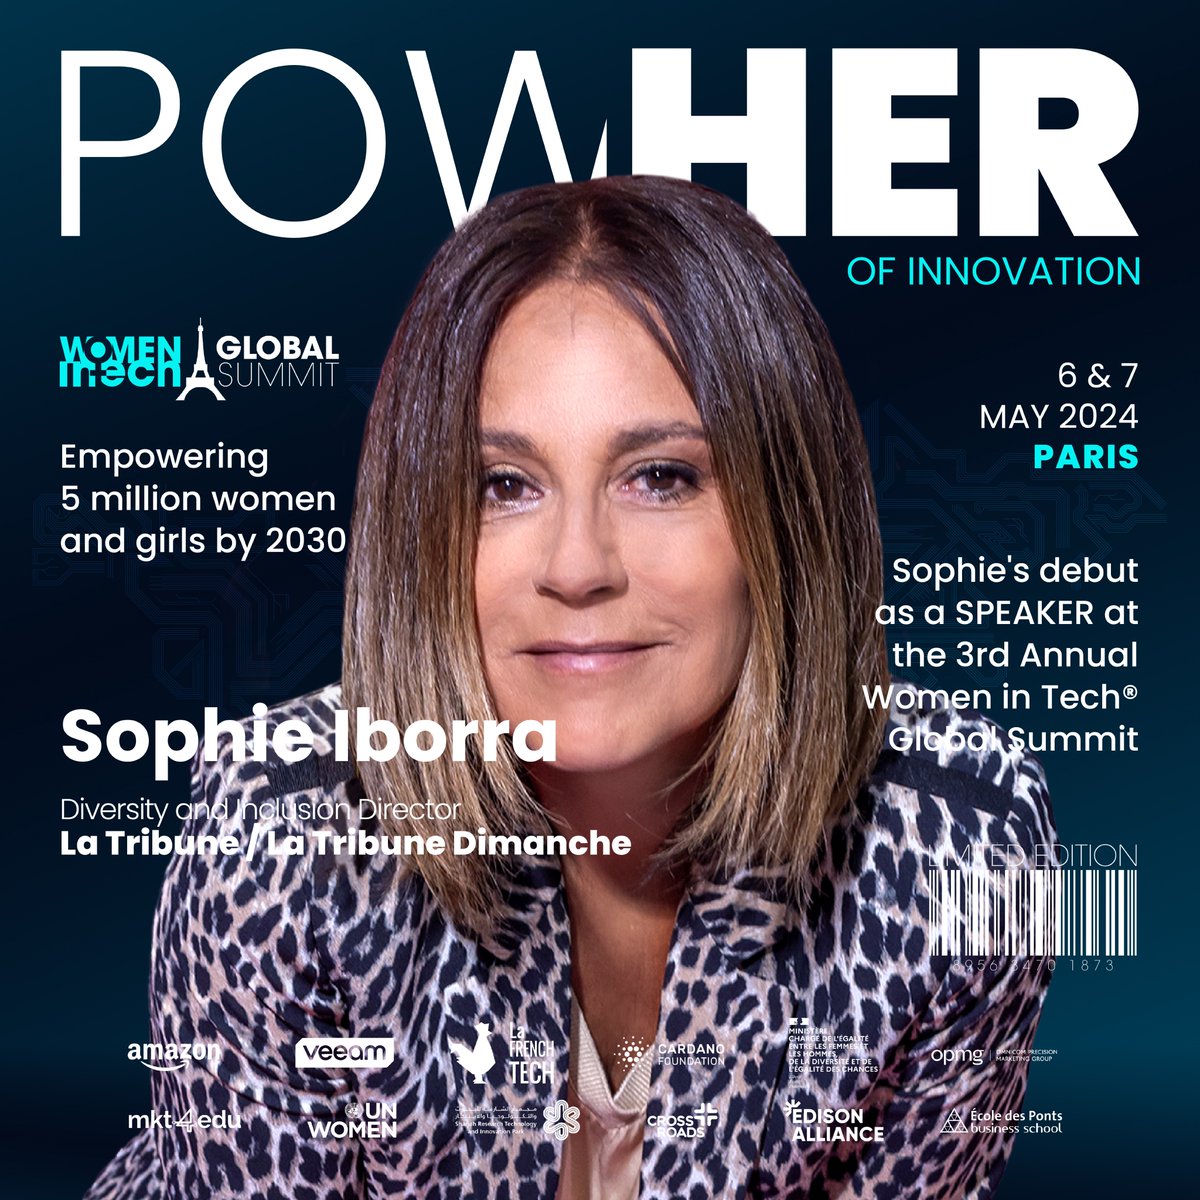 🎉Join us at the Women in Tech® Global Summit, where we’ll be unpacking and admiring the PowHER of Innovation as this year’s theme! Meet our speaker Sophie Iborra, Diversity and Inclusion Director at La Tribune Link: lnkd.in/dJrvNNJu #WITGS24 #PowHER